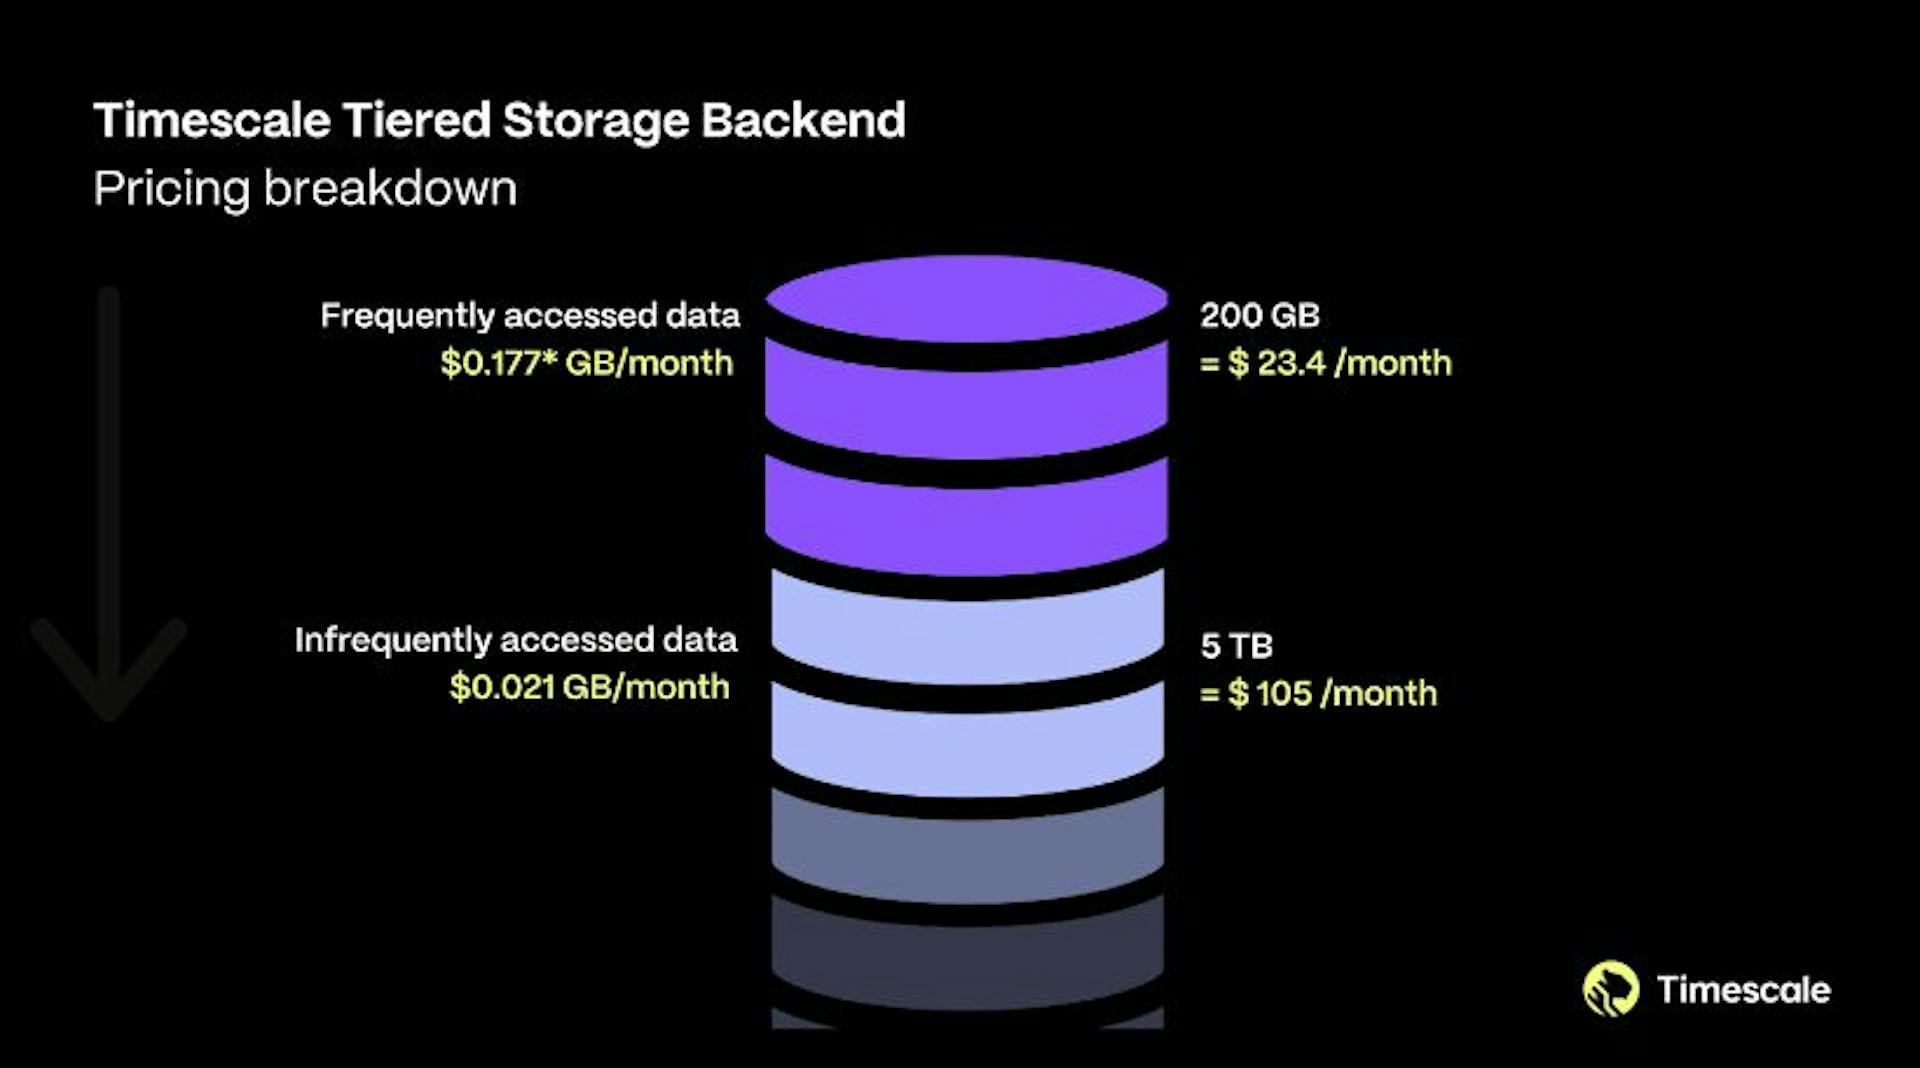 Moving your infrequently accessed data to the low-cost storage tier will save you significant money, making your storage bill very affordable